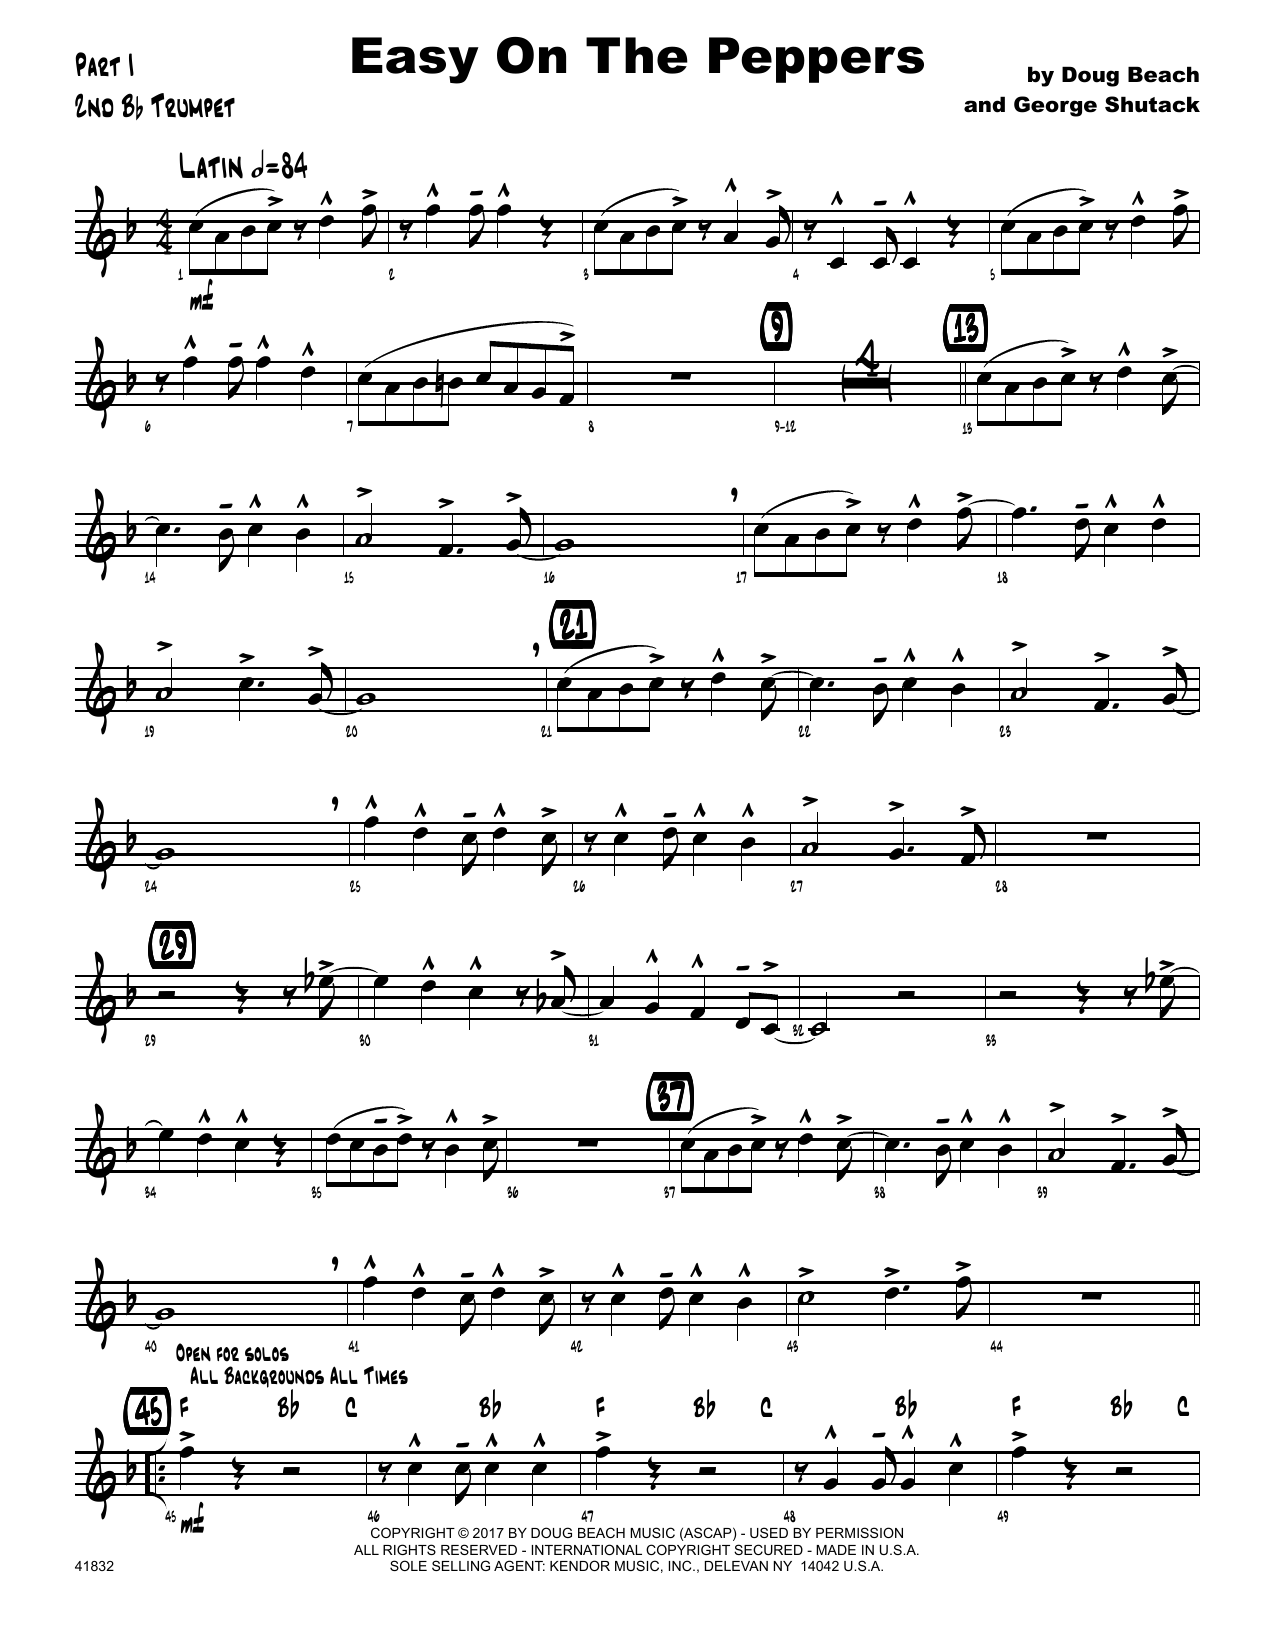 Download Doug Beach & George Shutack Easy On The Peppers - 2nd Bb Trumpet Sheet Music